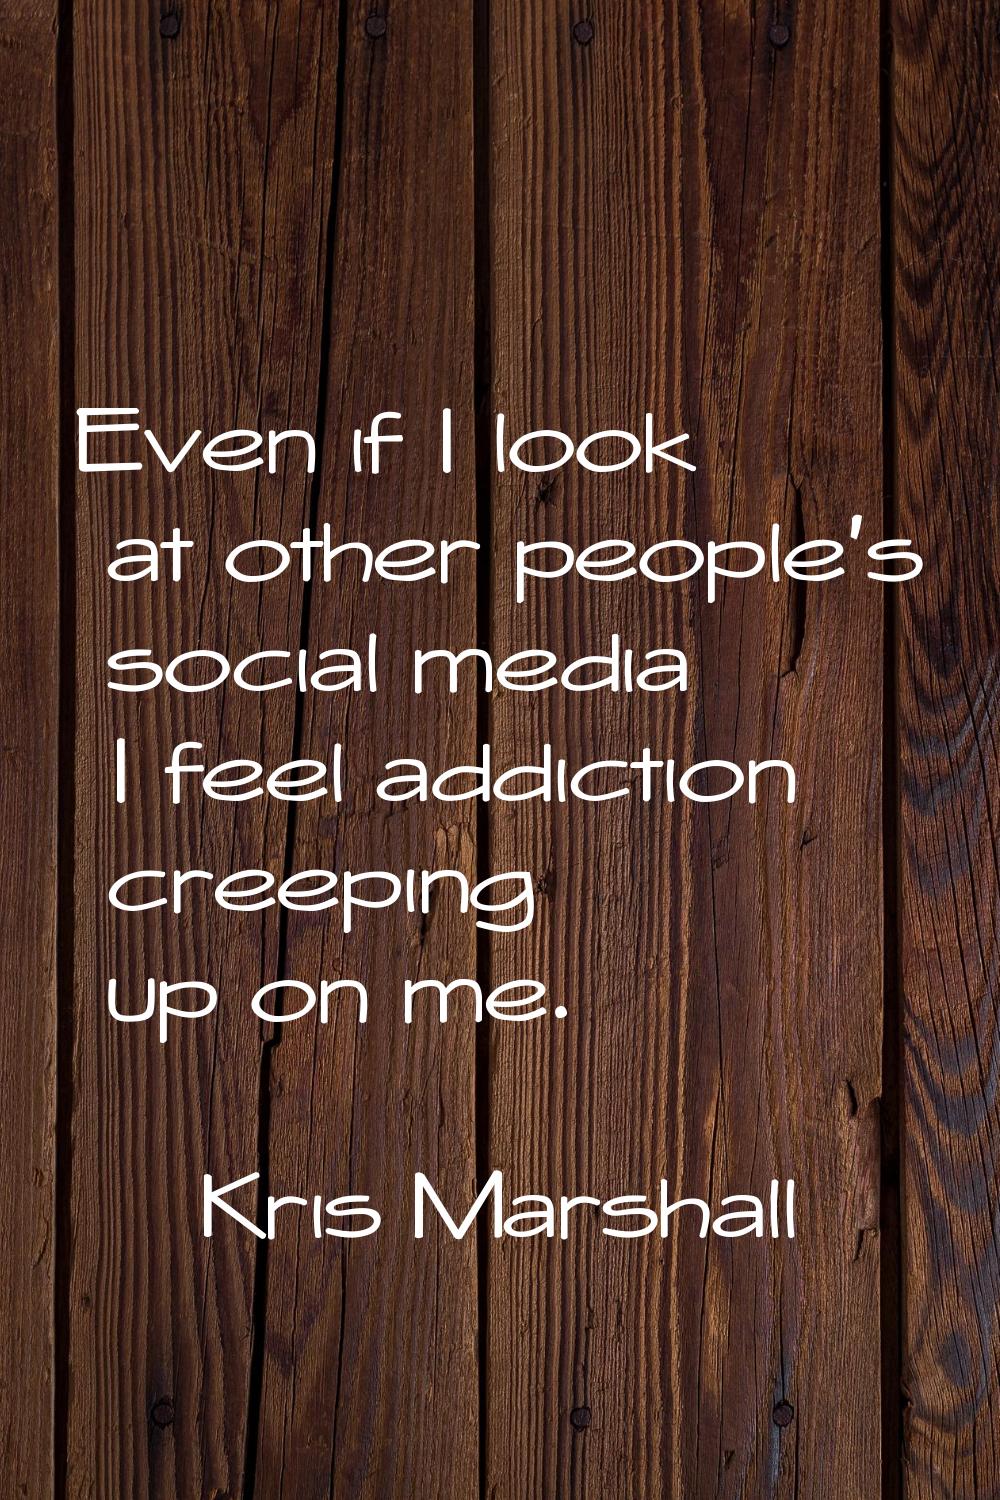 Even if I look at other people's social media I feel addiction creeping up on me.